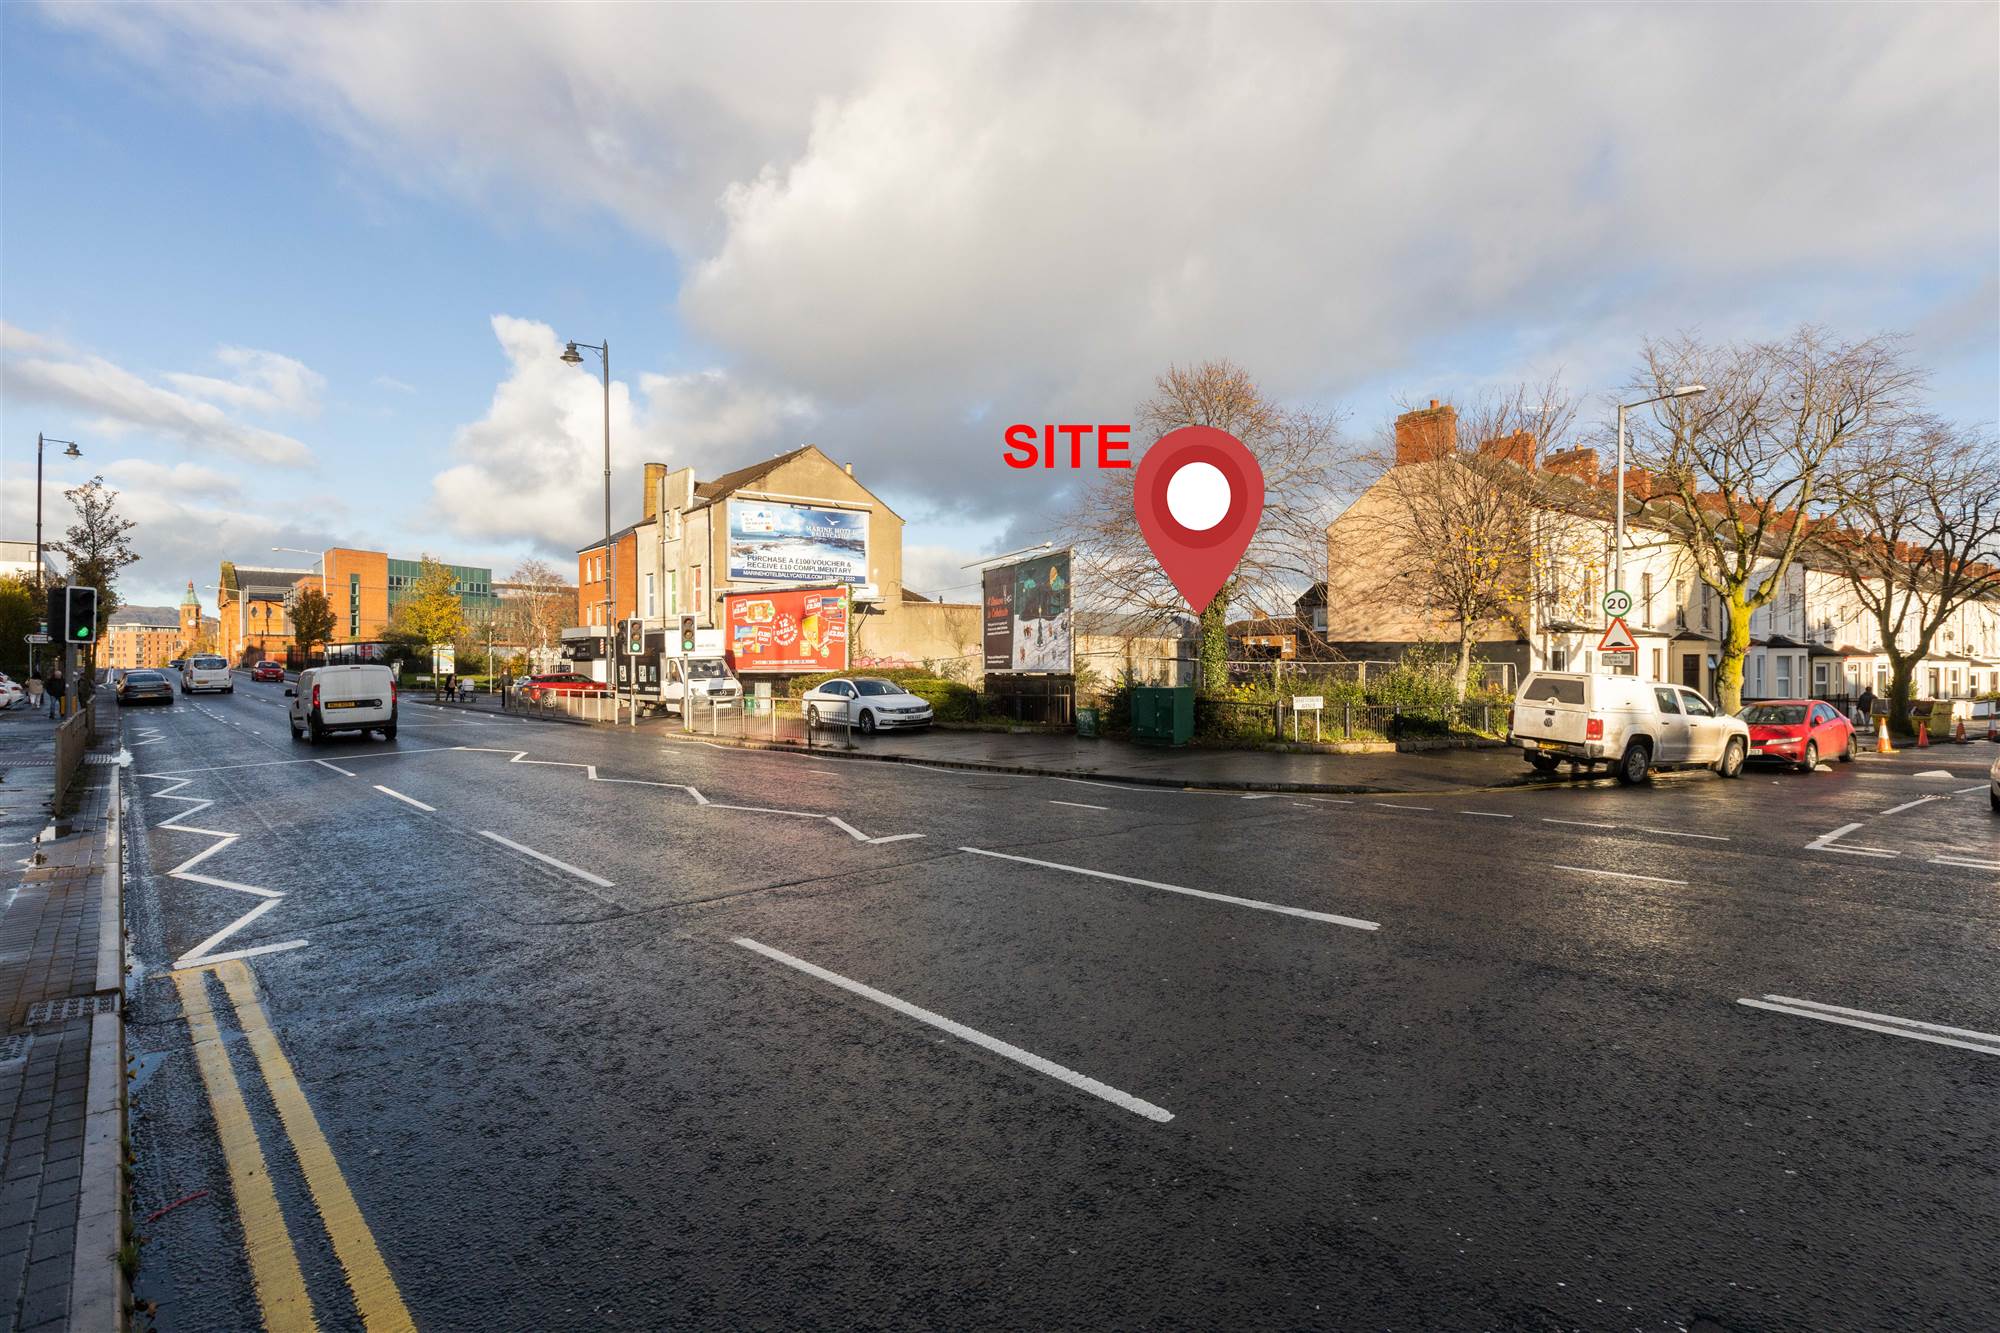 Site at 42-50 Ormeau Road